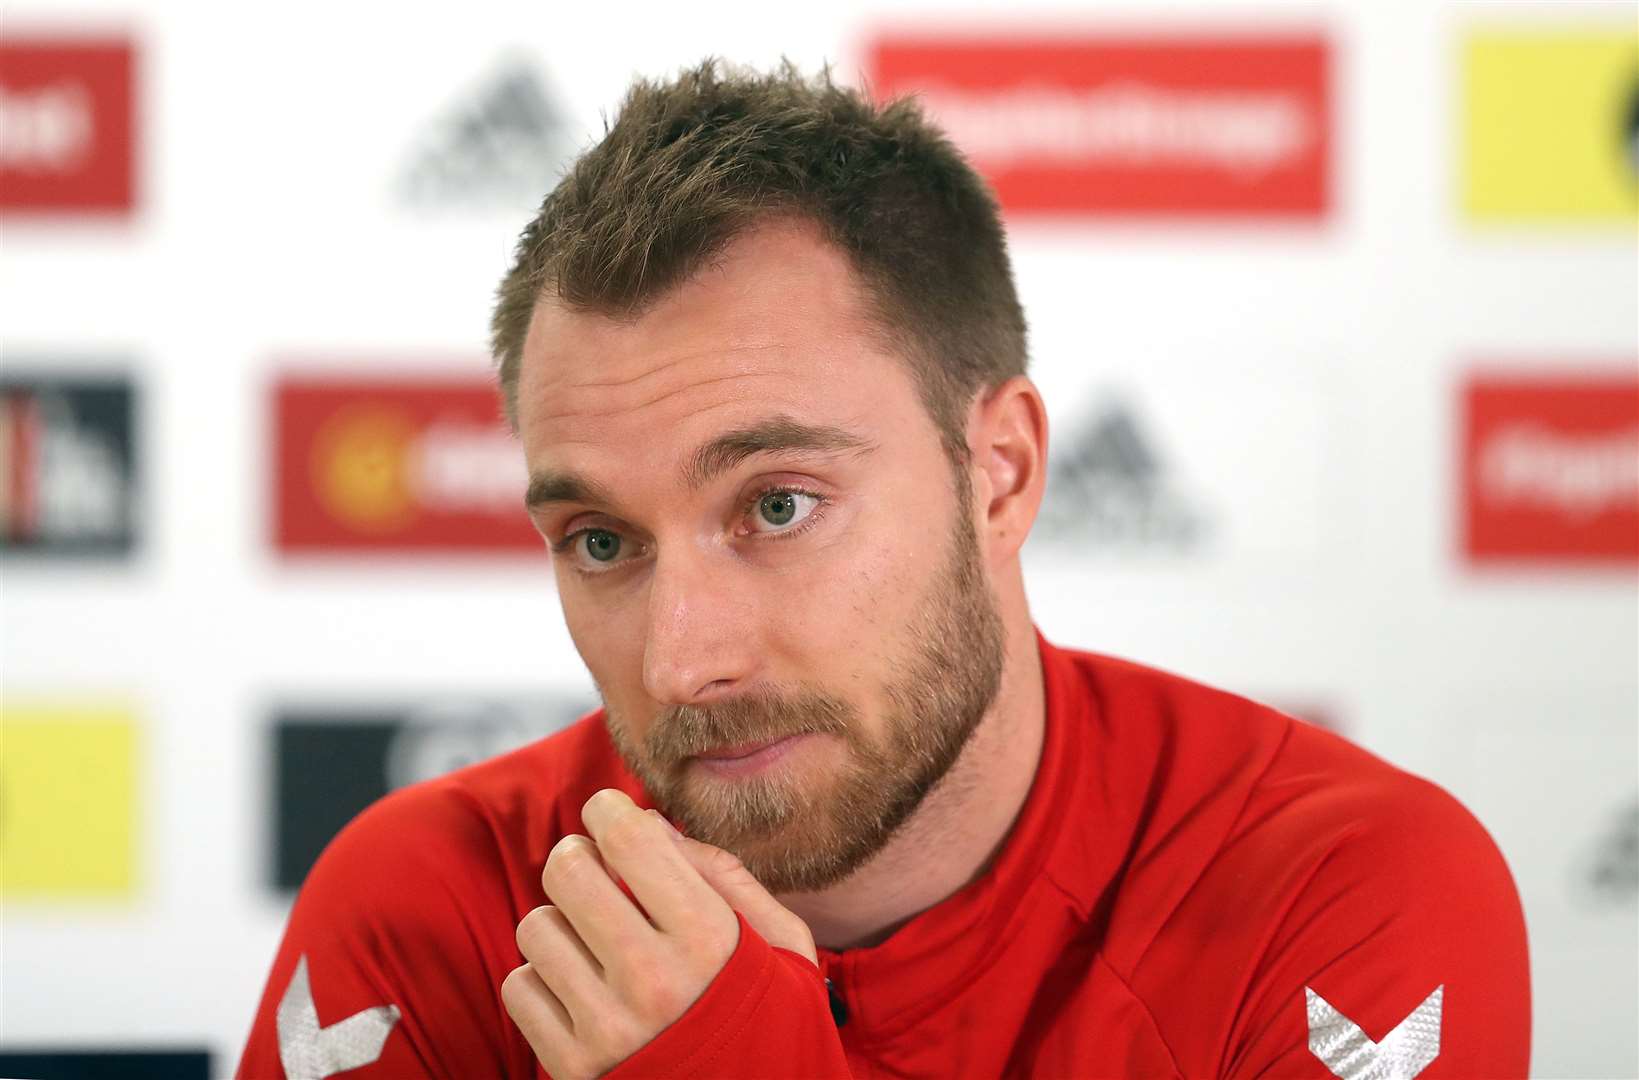 Denmark’s Christian Eriksen is recovering after medics saved his life when he suffered a cardiac arrest in the Euro 2020 match against Finland (David Davies/PA)